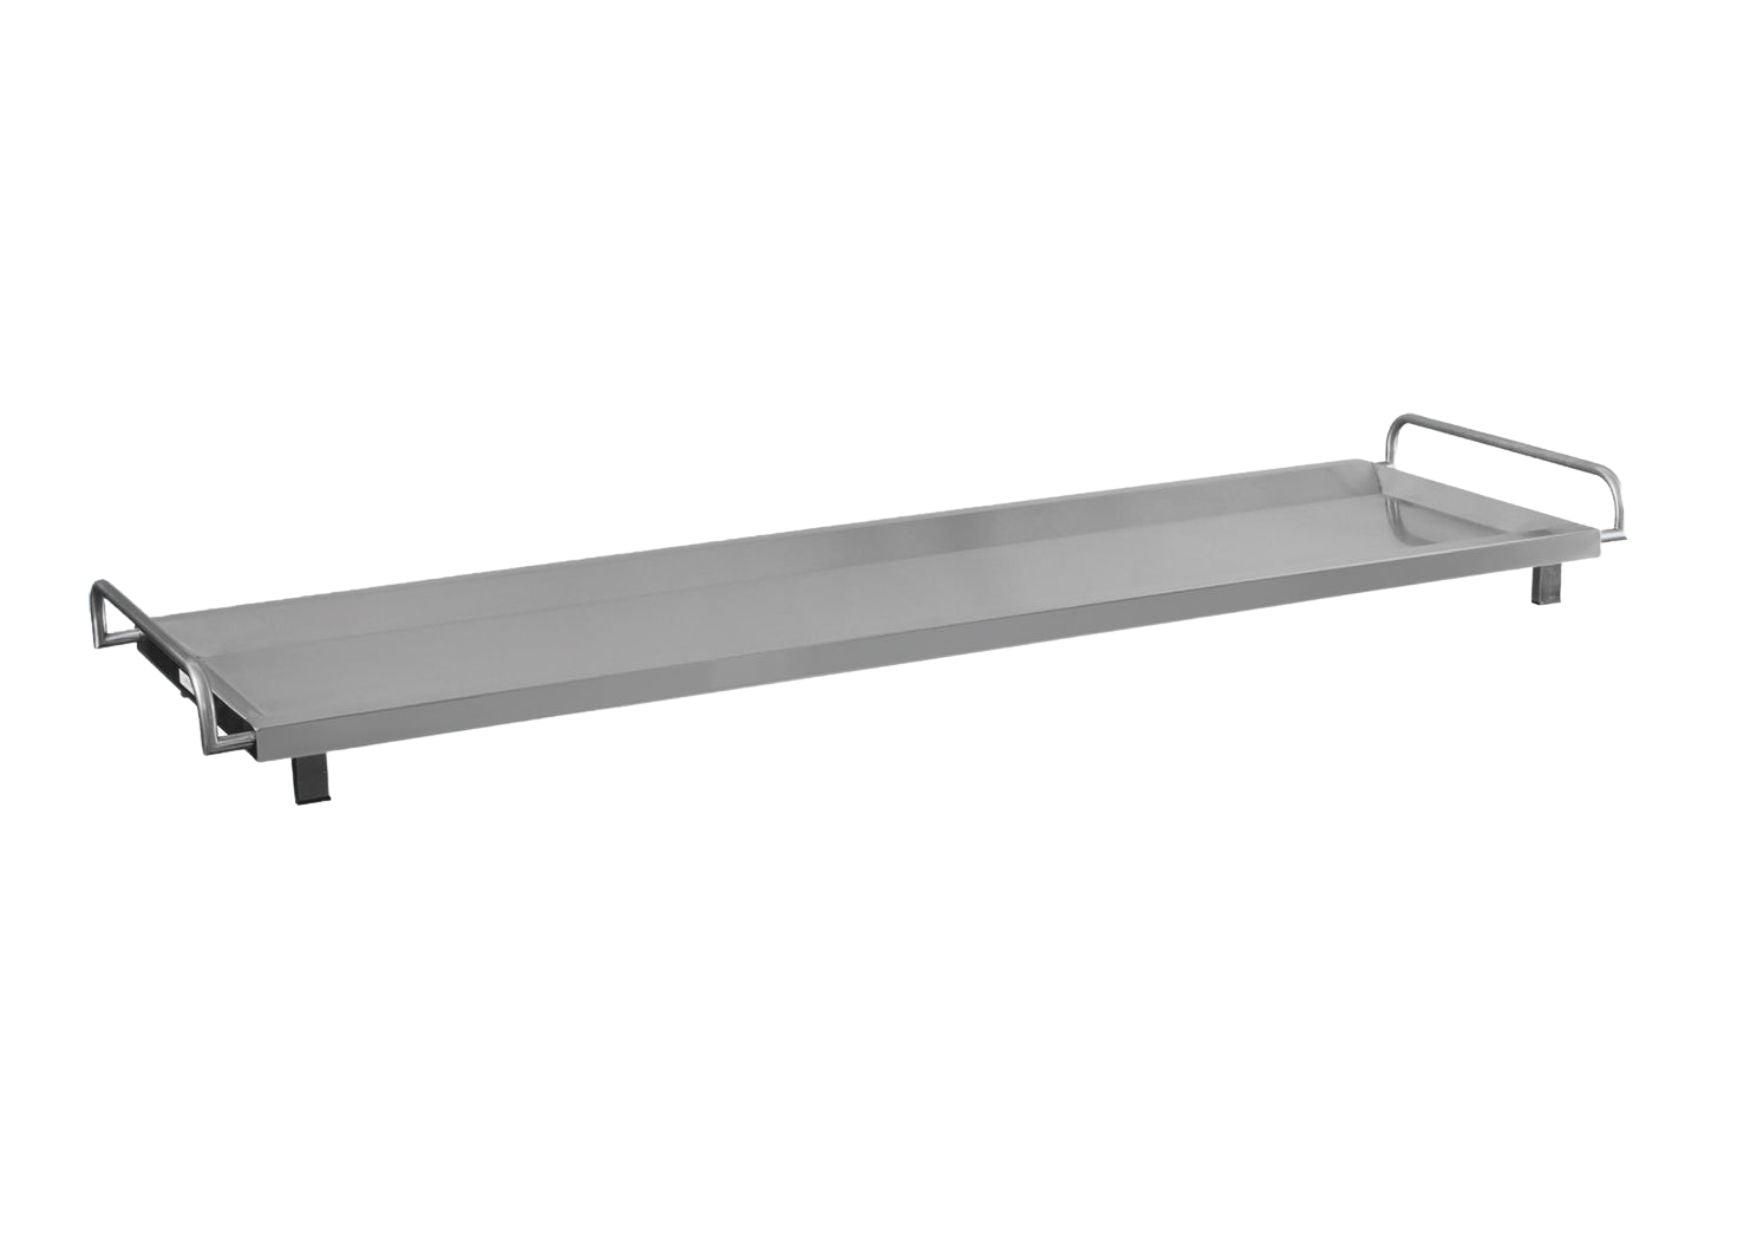 Stainless steel body tray with feet